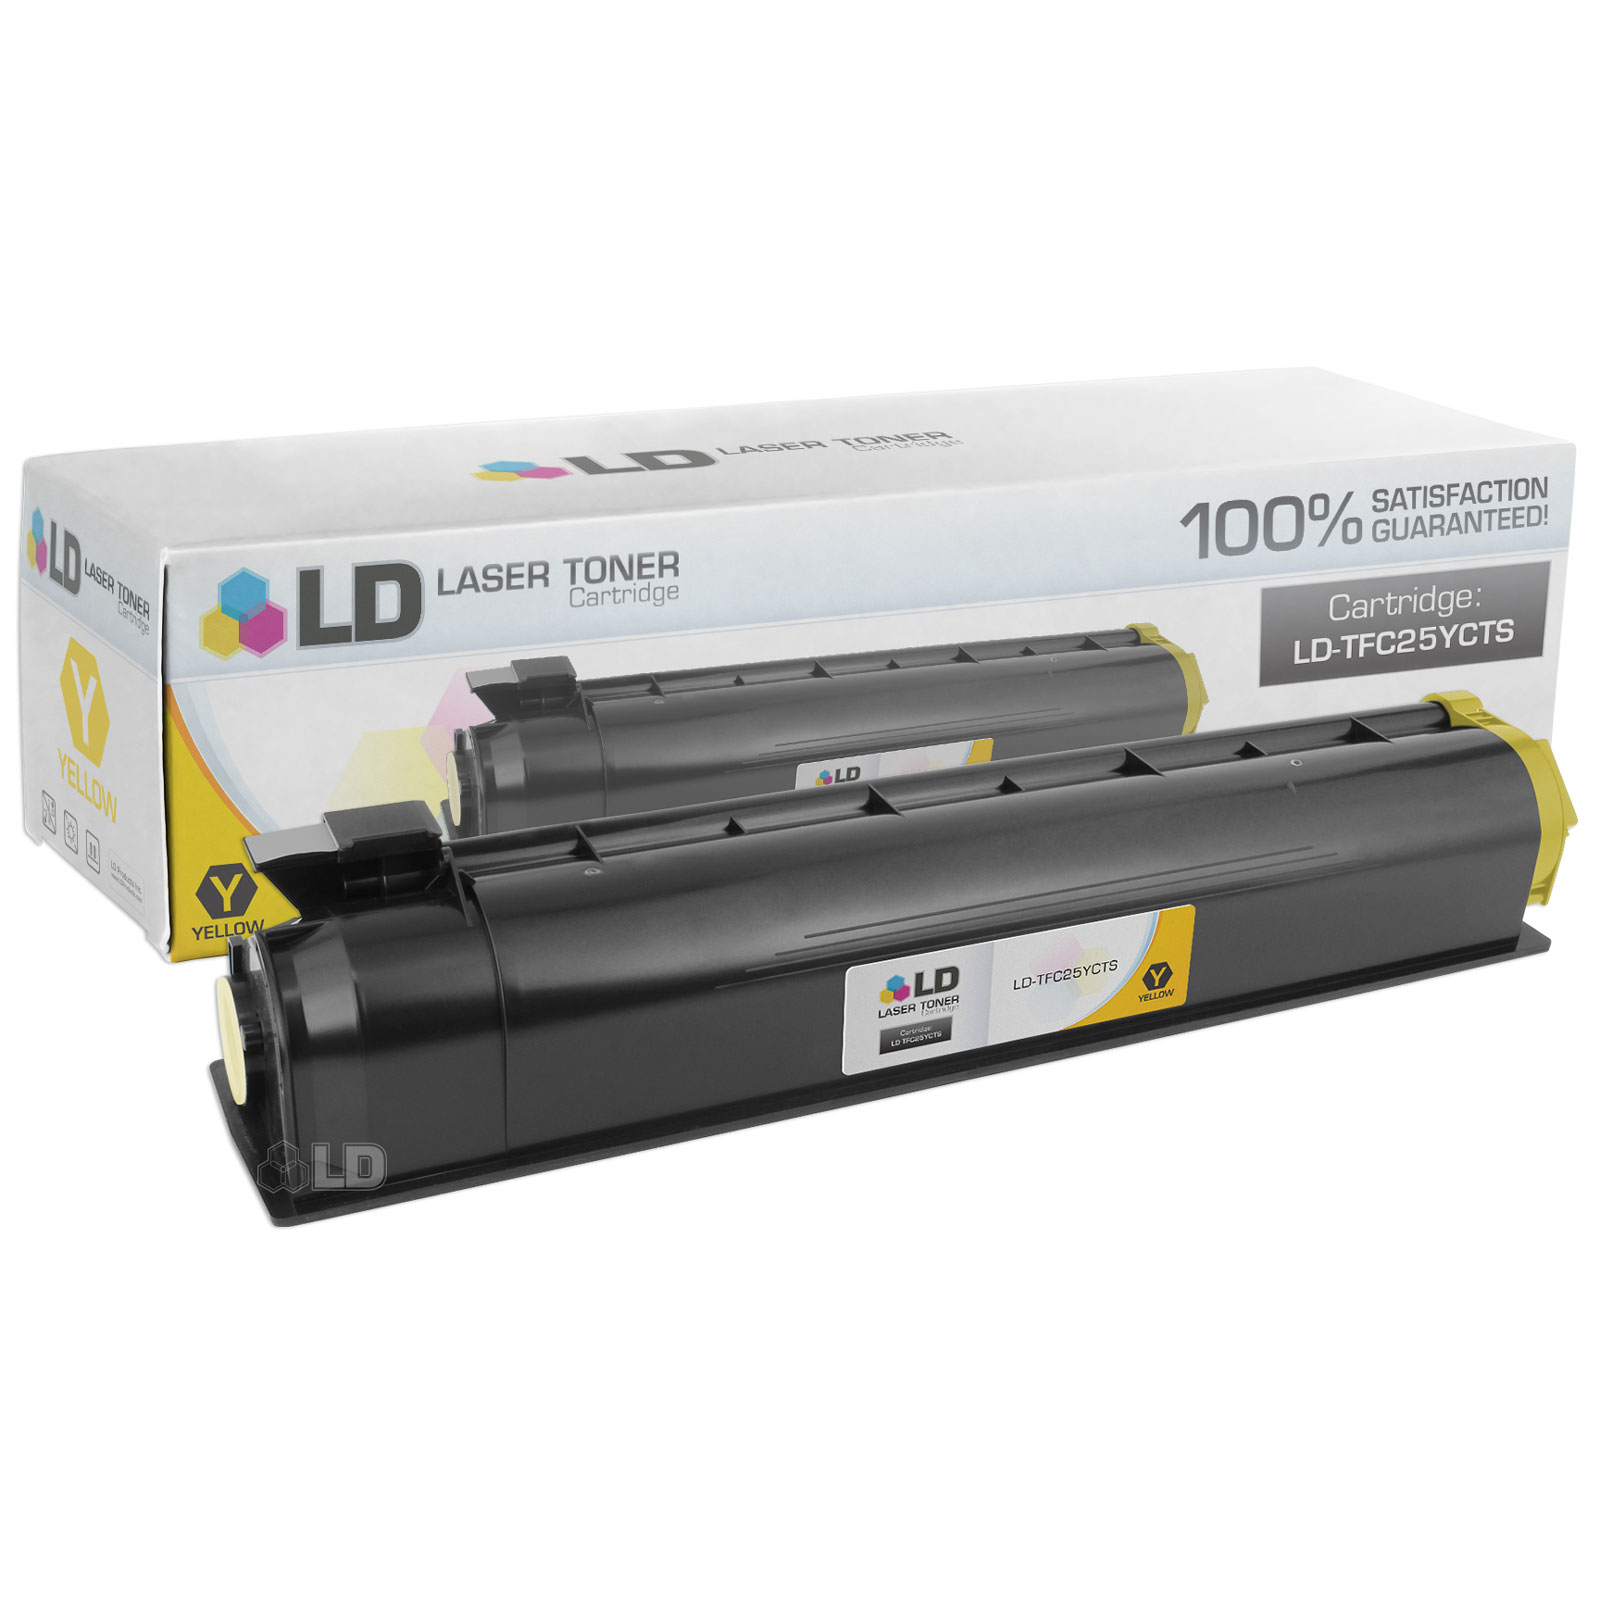 LD Compatible Replacement for Toshiba T-FC25-Y Yellow Laser Toner Cartridge for use in Toshiba e-Studio 2040C, 2540C, 3040C, 3540C, and 4540C s - image 1 of 1